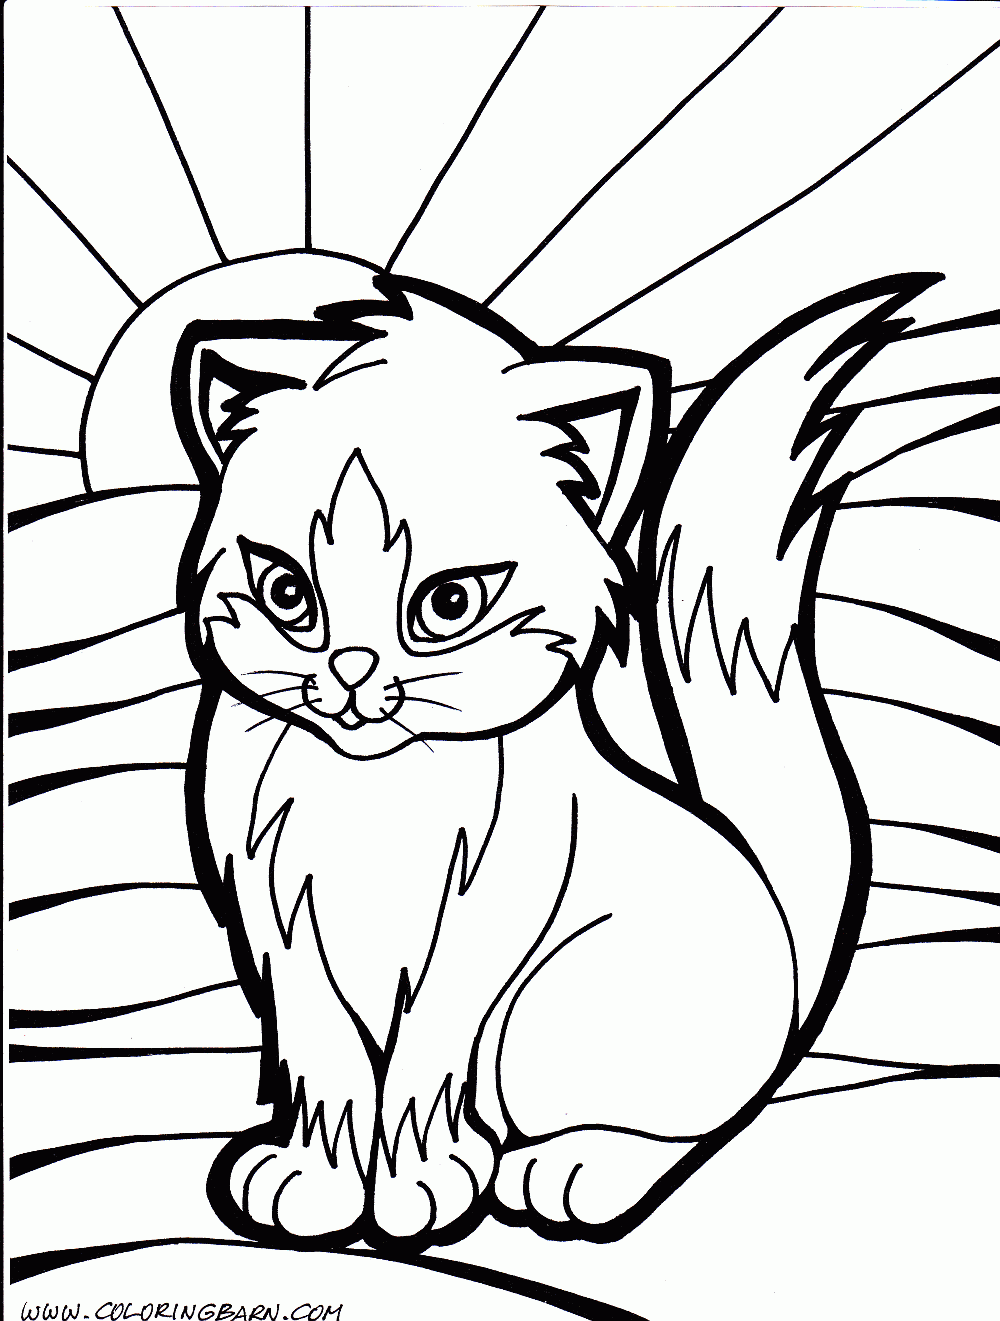 Cute Cat Coloring Pages   Only Coloring Pages   Coloring Home